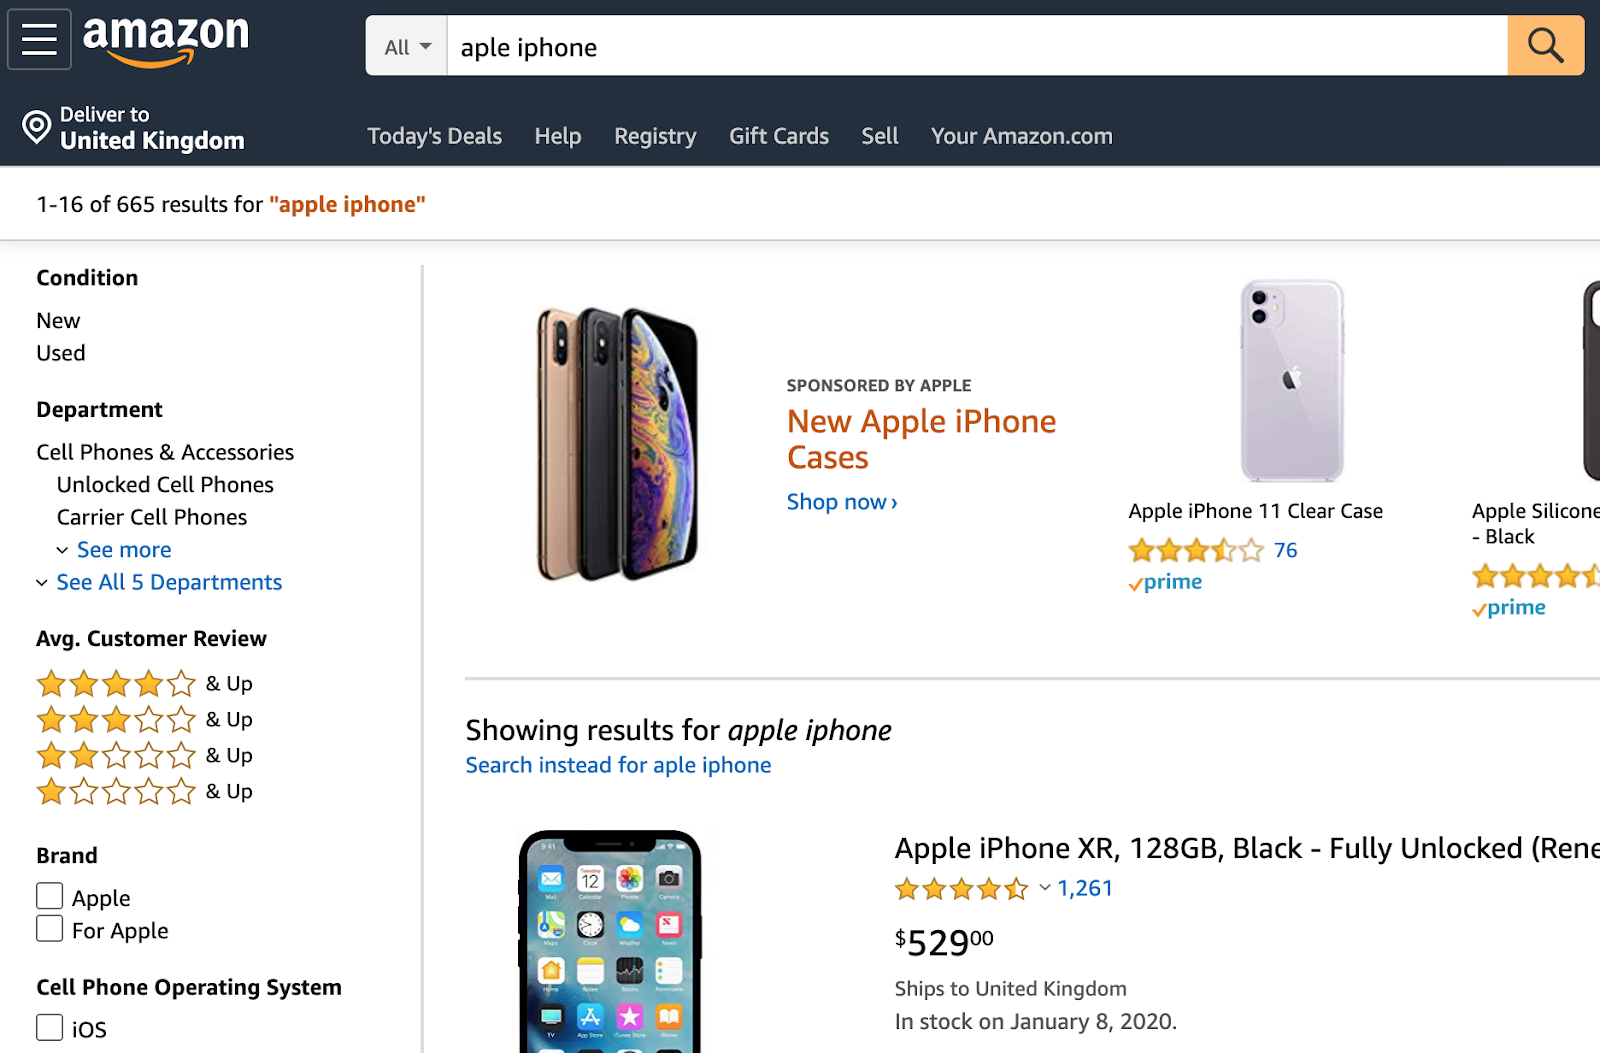 Amazon's search results employ auto-correct for obvious typos to prevent unnecessary error messages.